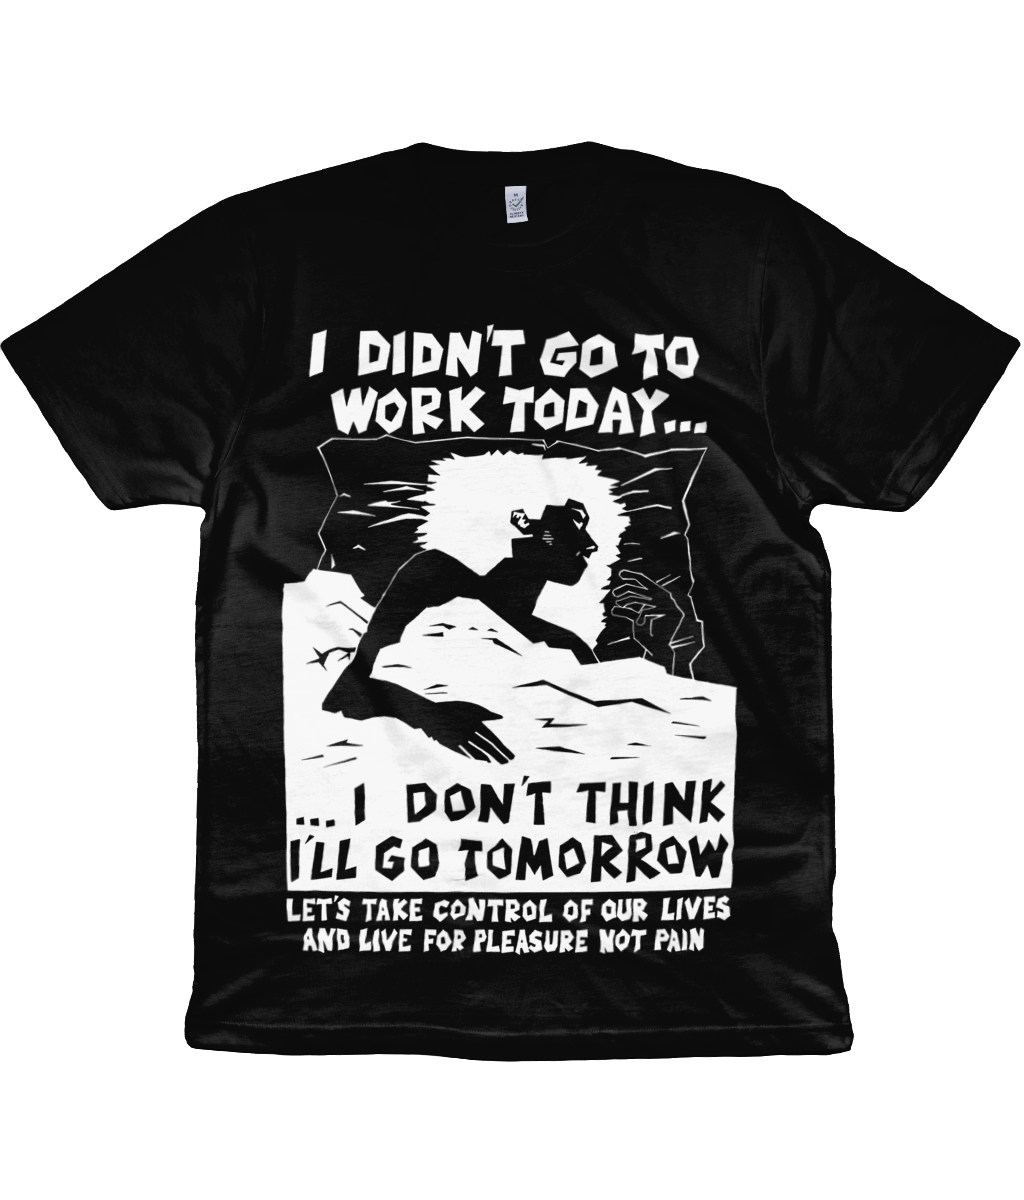 I DIDN'T GO TO WORK TODAY... - BLACK